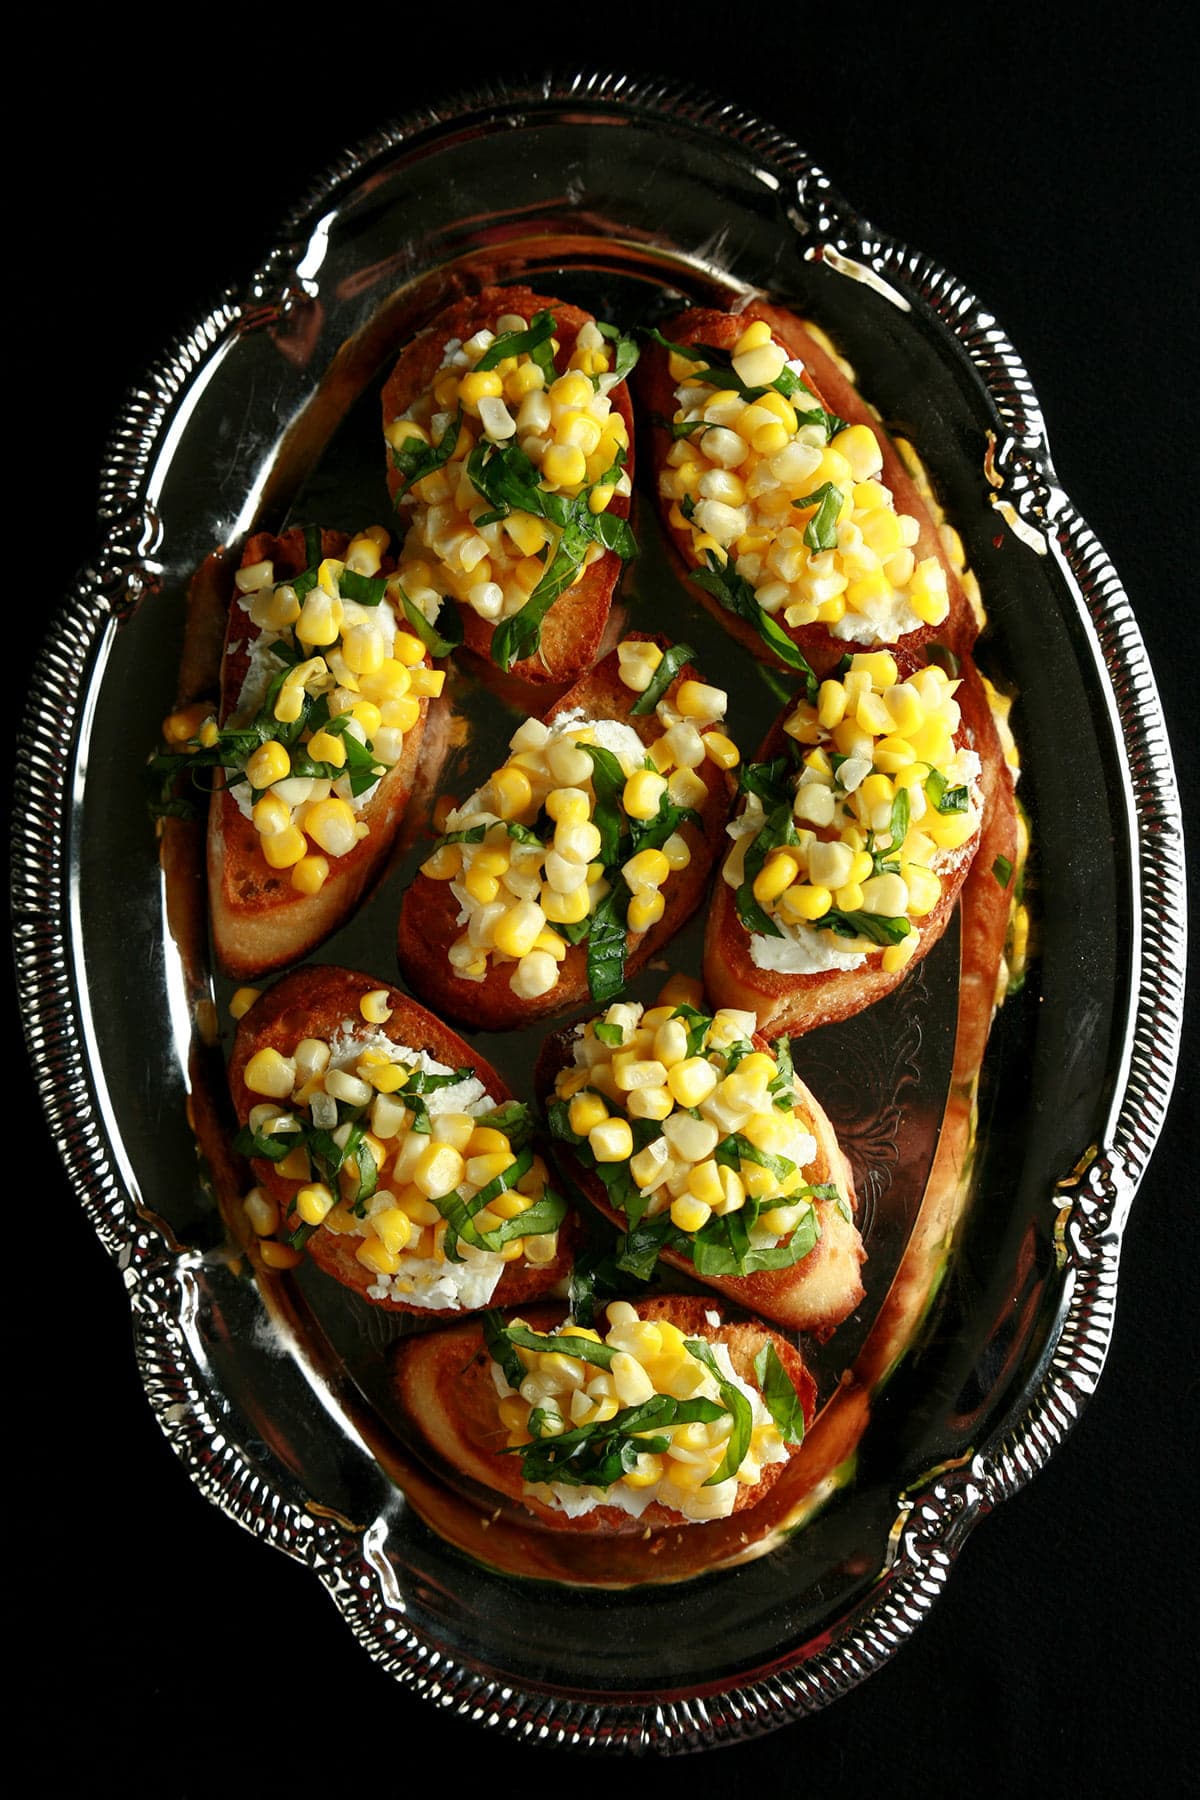 A silver, oval shaped platter, filled with sweet corn bruschetta - slices of toasted baguette, smeared with goat cheese, and topped with sweet corn kernels, basil, and balsamic vinegar.